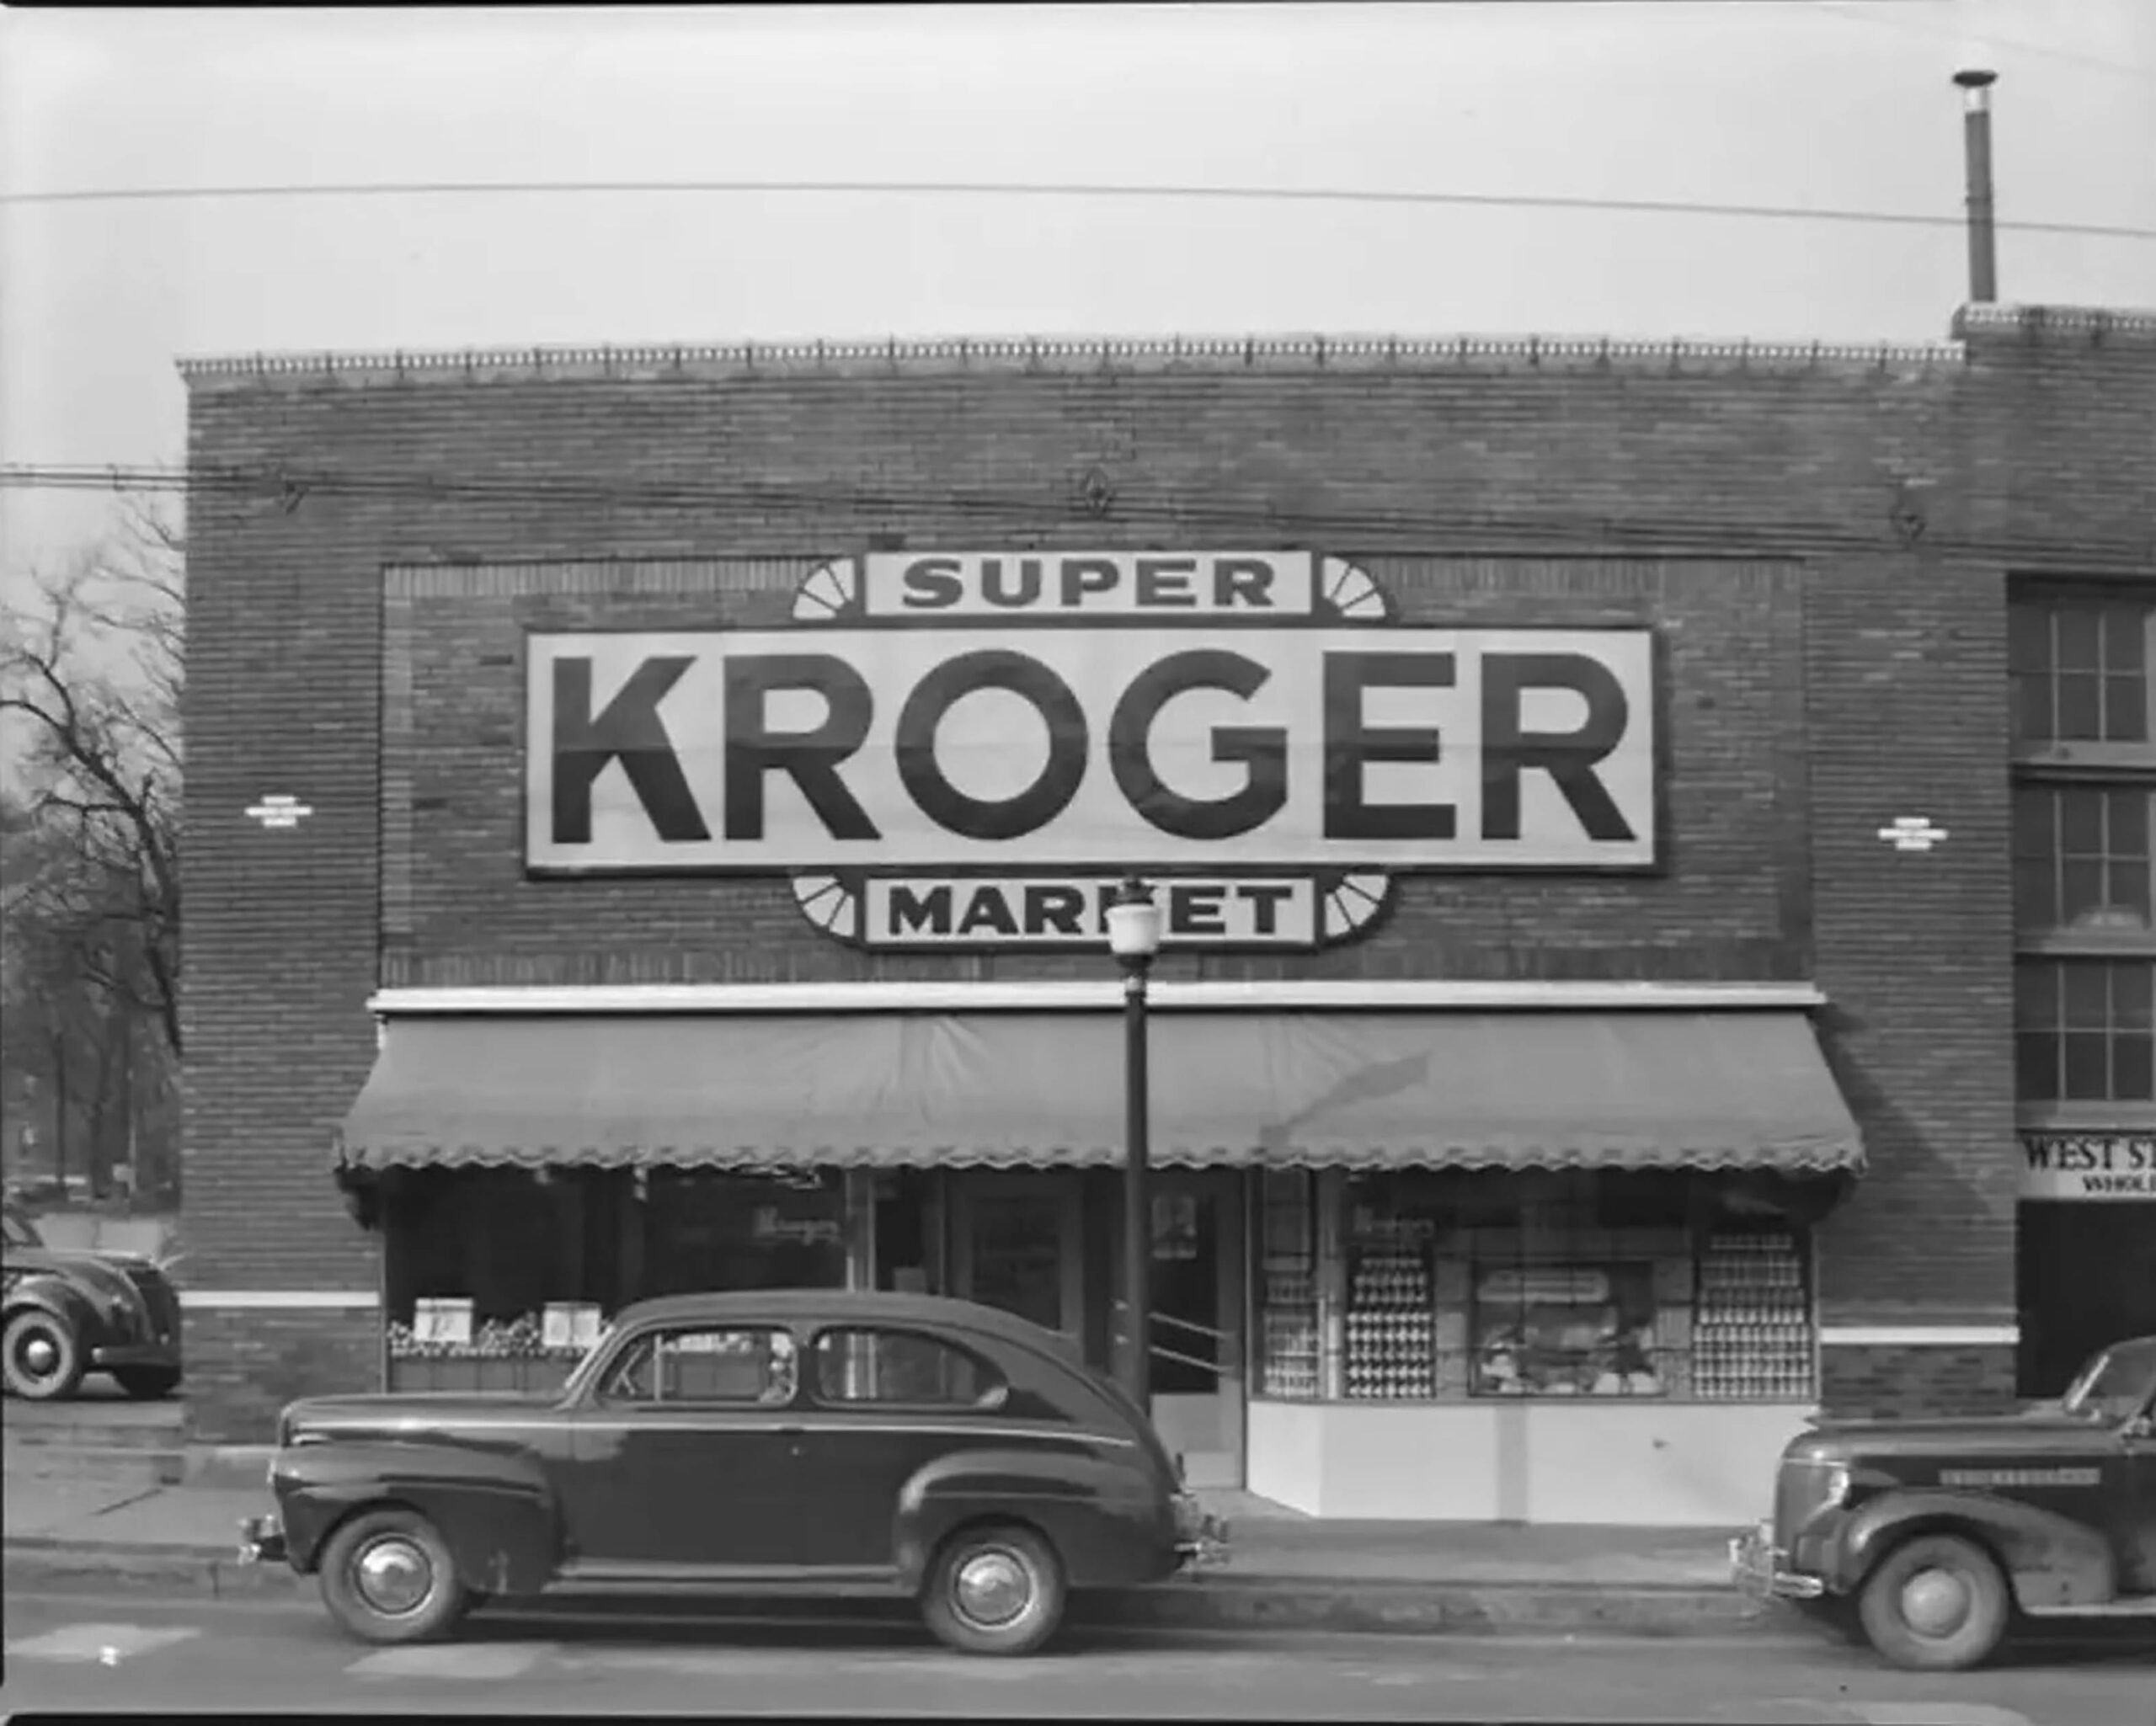 Maplewood History: A Rare Image of an Early Kroger Super Market